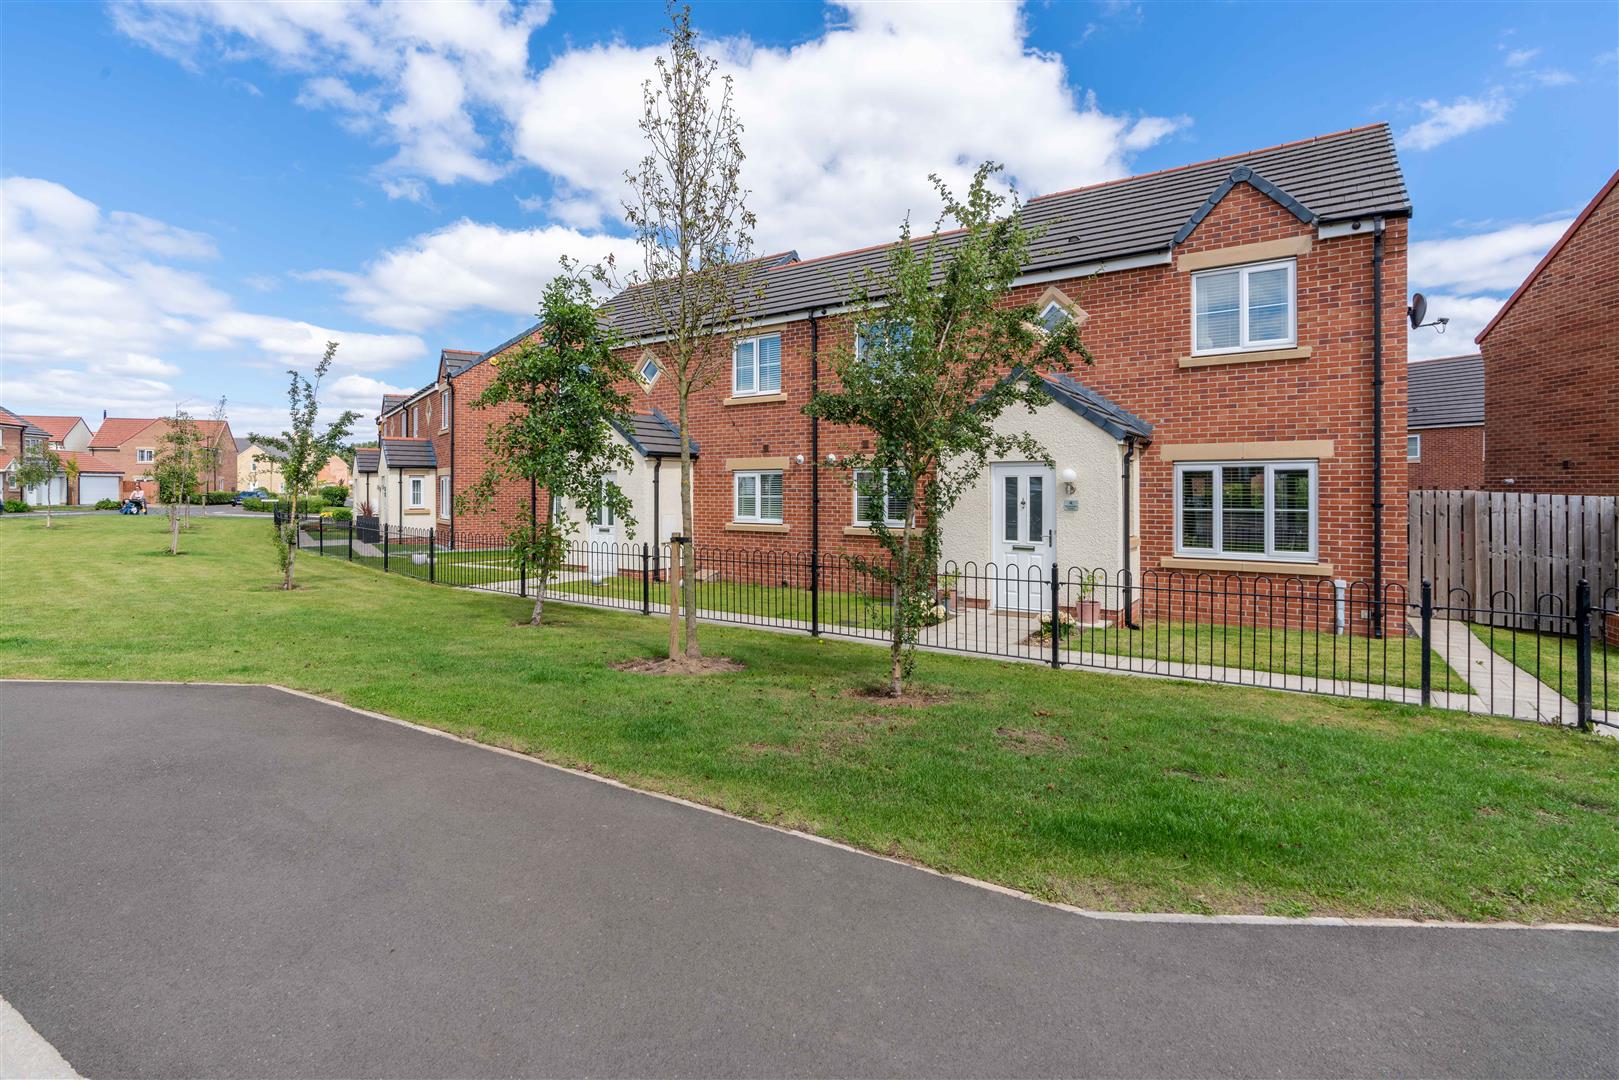 3 bed semi-detached house for sale in Nuthatch Close, Wideopen 33